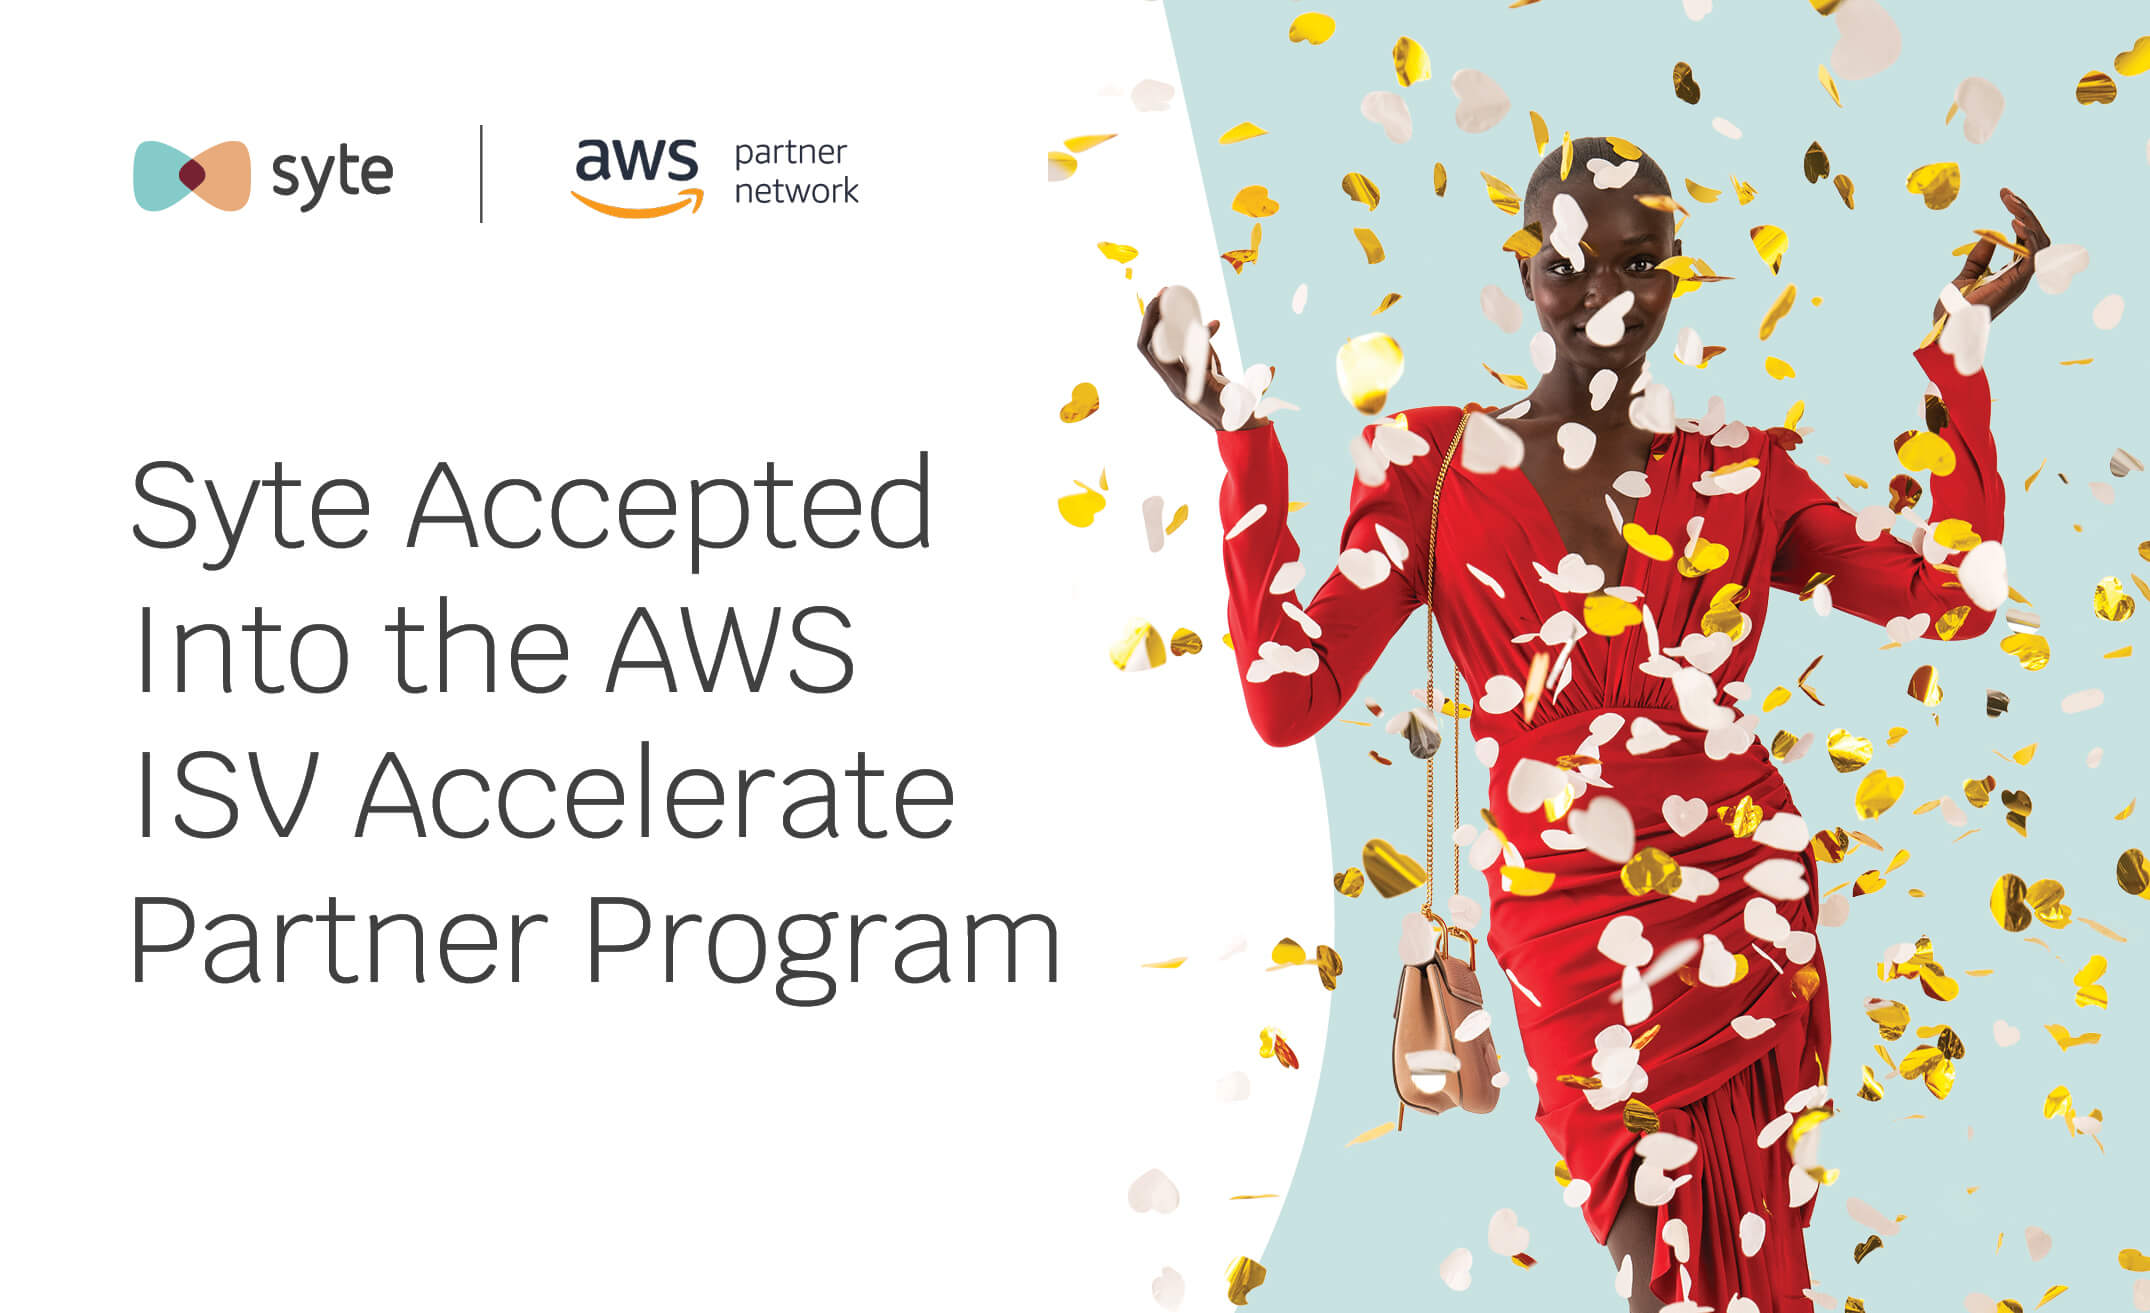 Syte Accepted Into the AWS ISV Accelerate Partner Program